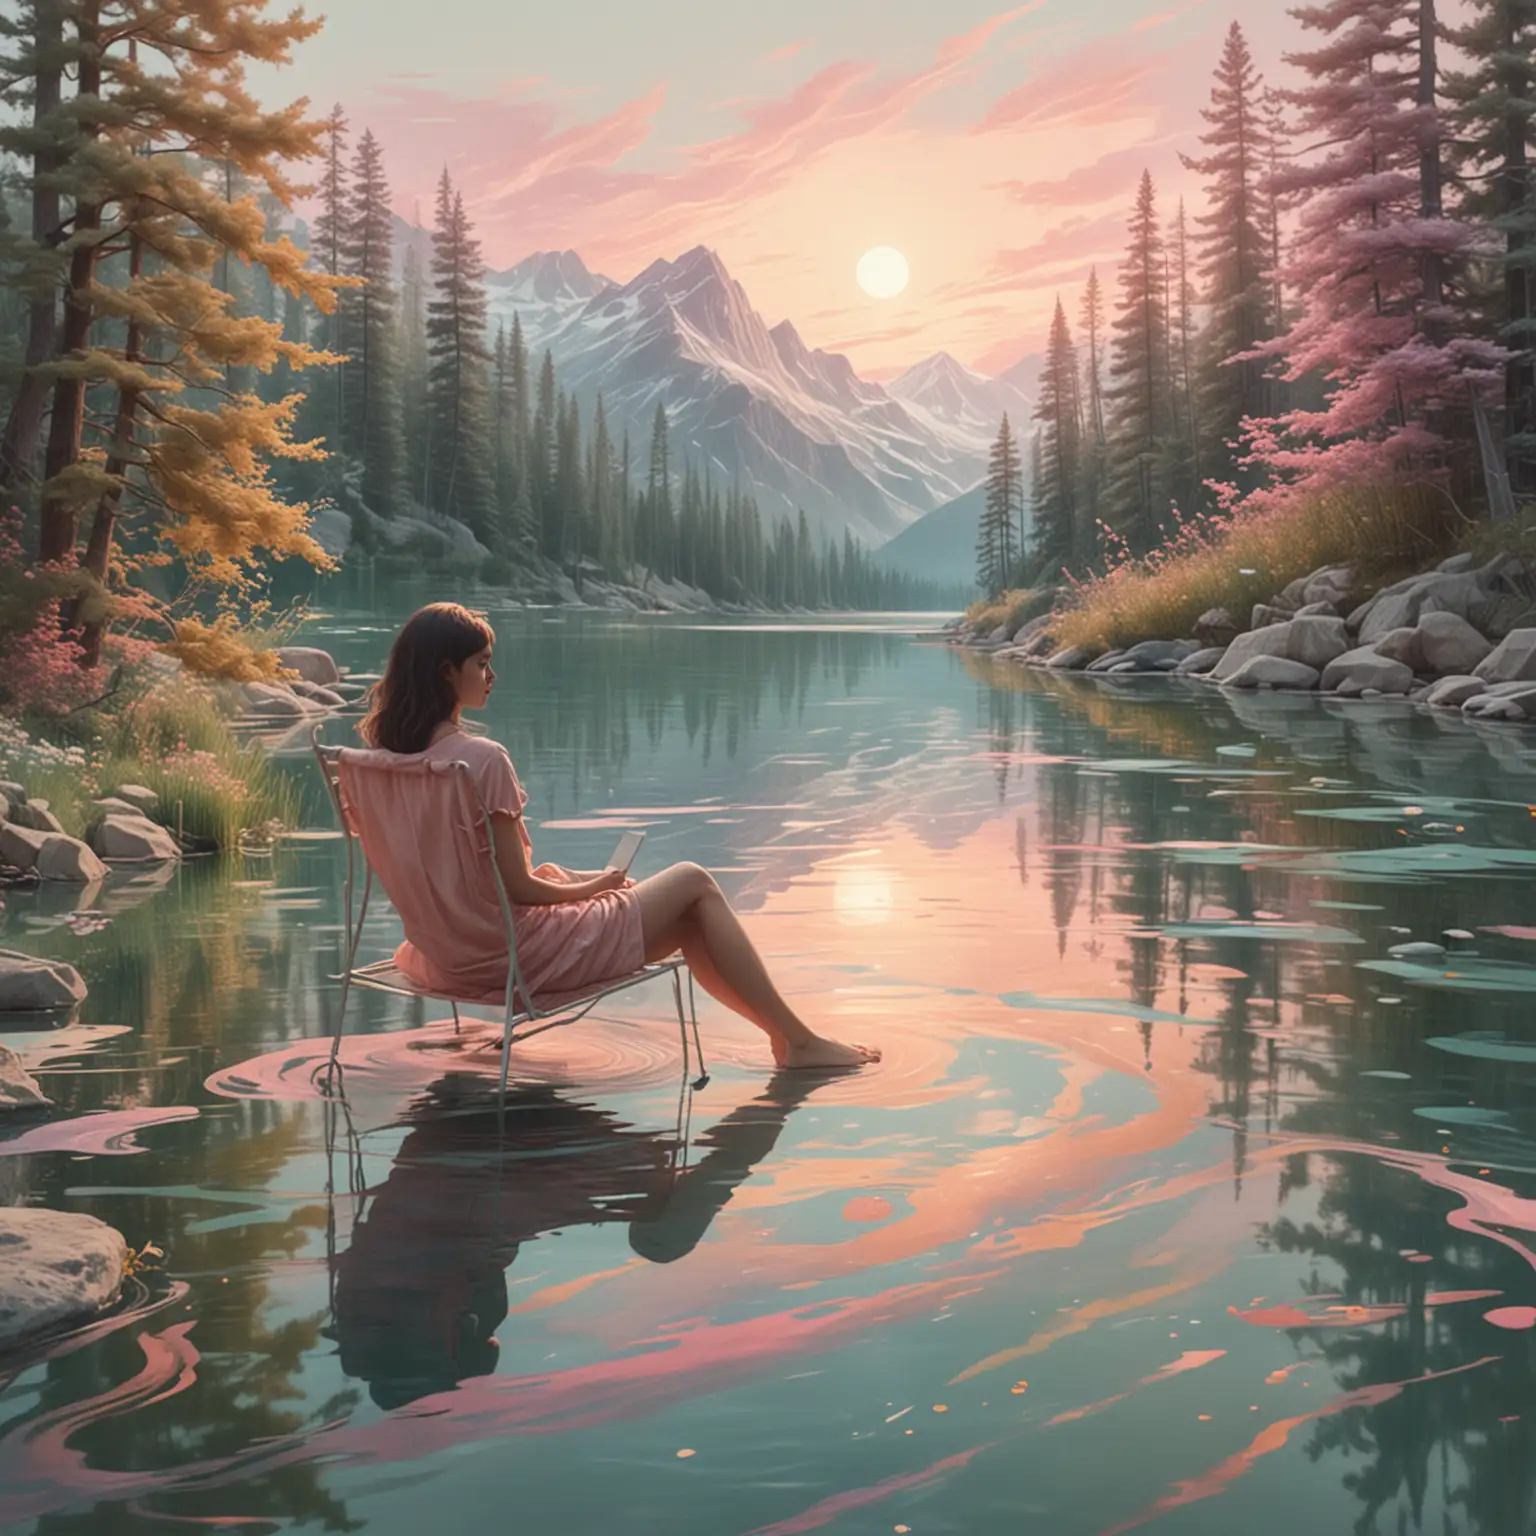 Surreal Lakeside Serenity Pastel Colors and Swirling Imagery